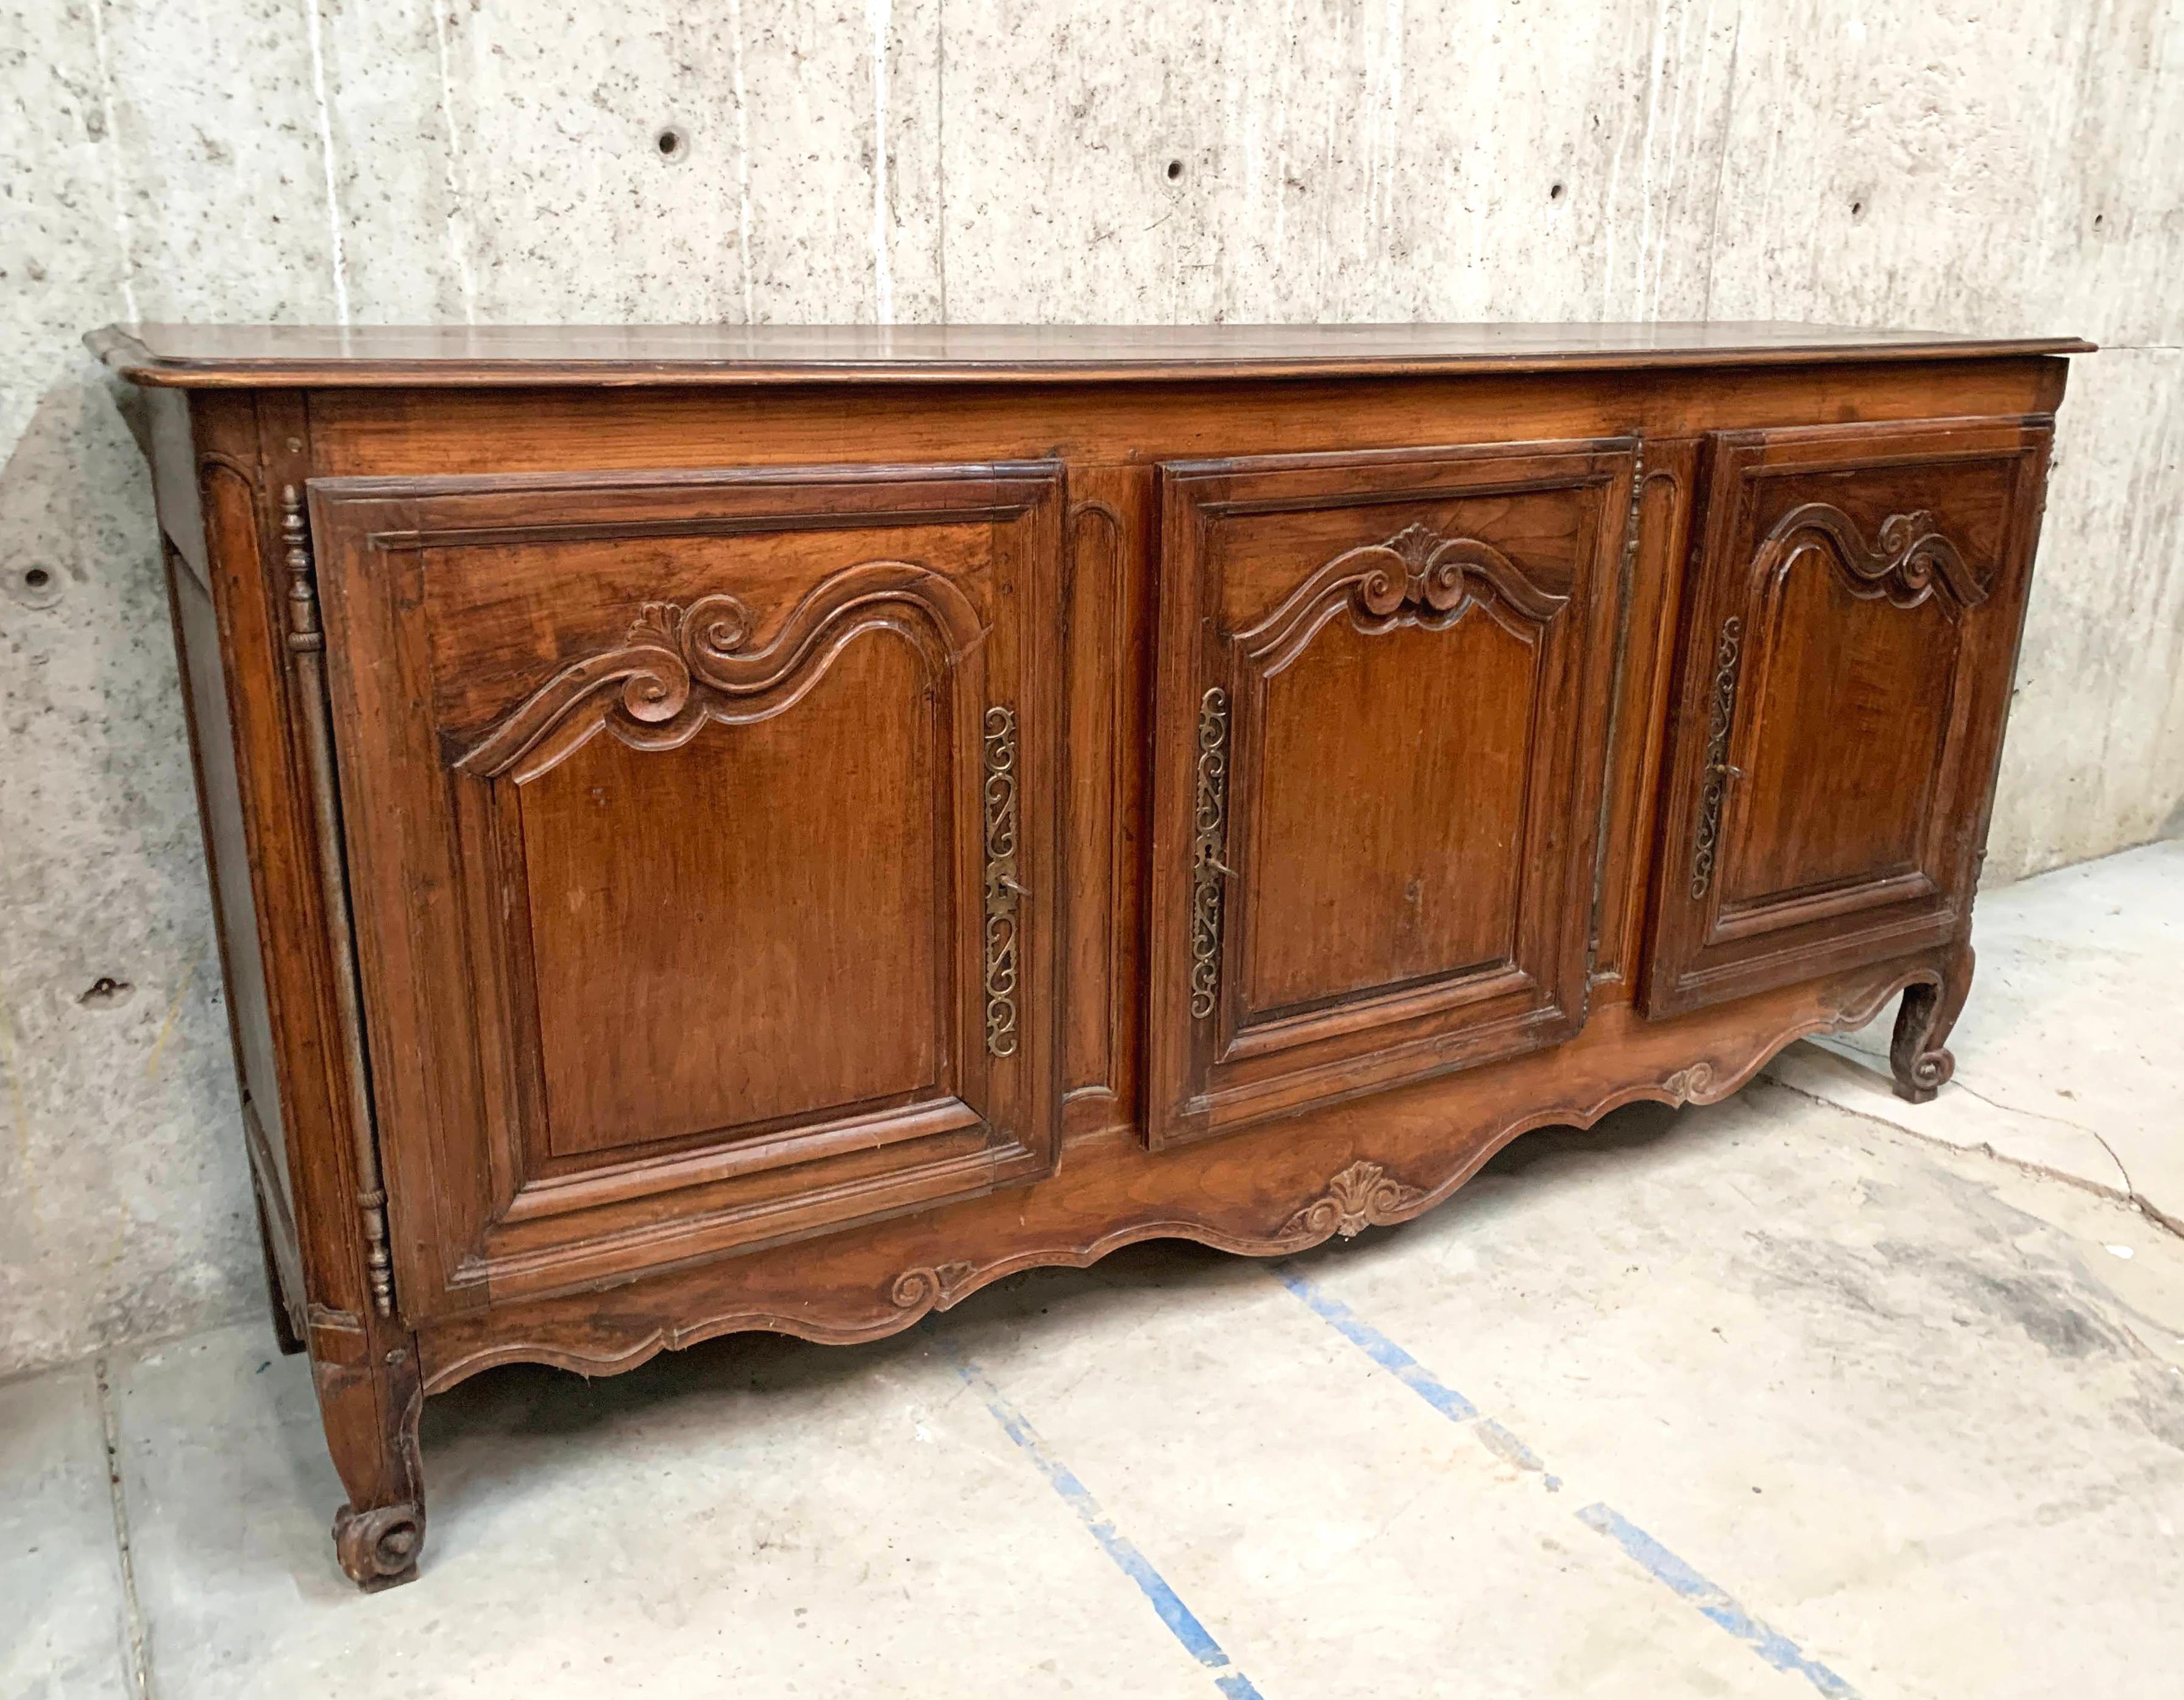 French Provincial fruitwood sideboard, early 19th c., long rectangular case fitted with three cabinet doors, carved scroll motif on buffet doors, scalloped apron, rising on cabriole legs, ending in whorl feet. The fruitwood has a lovely patina, as